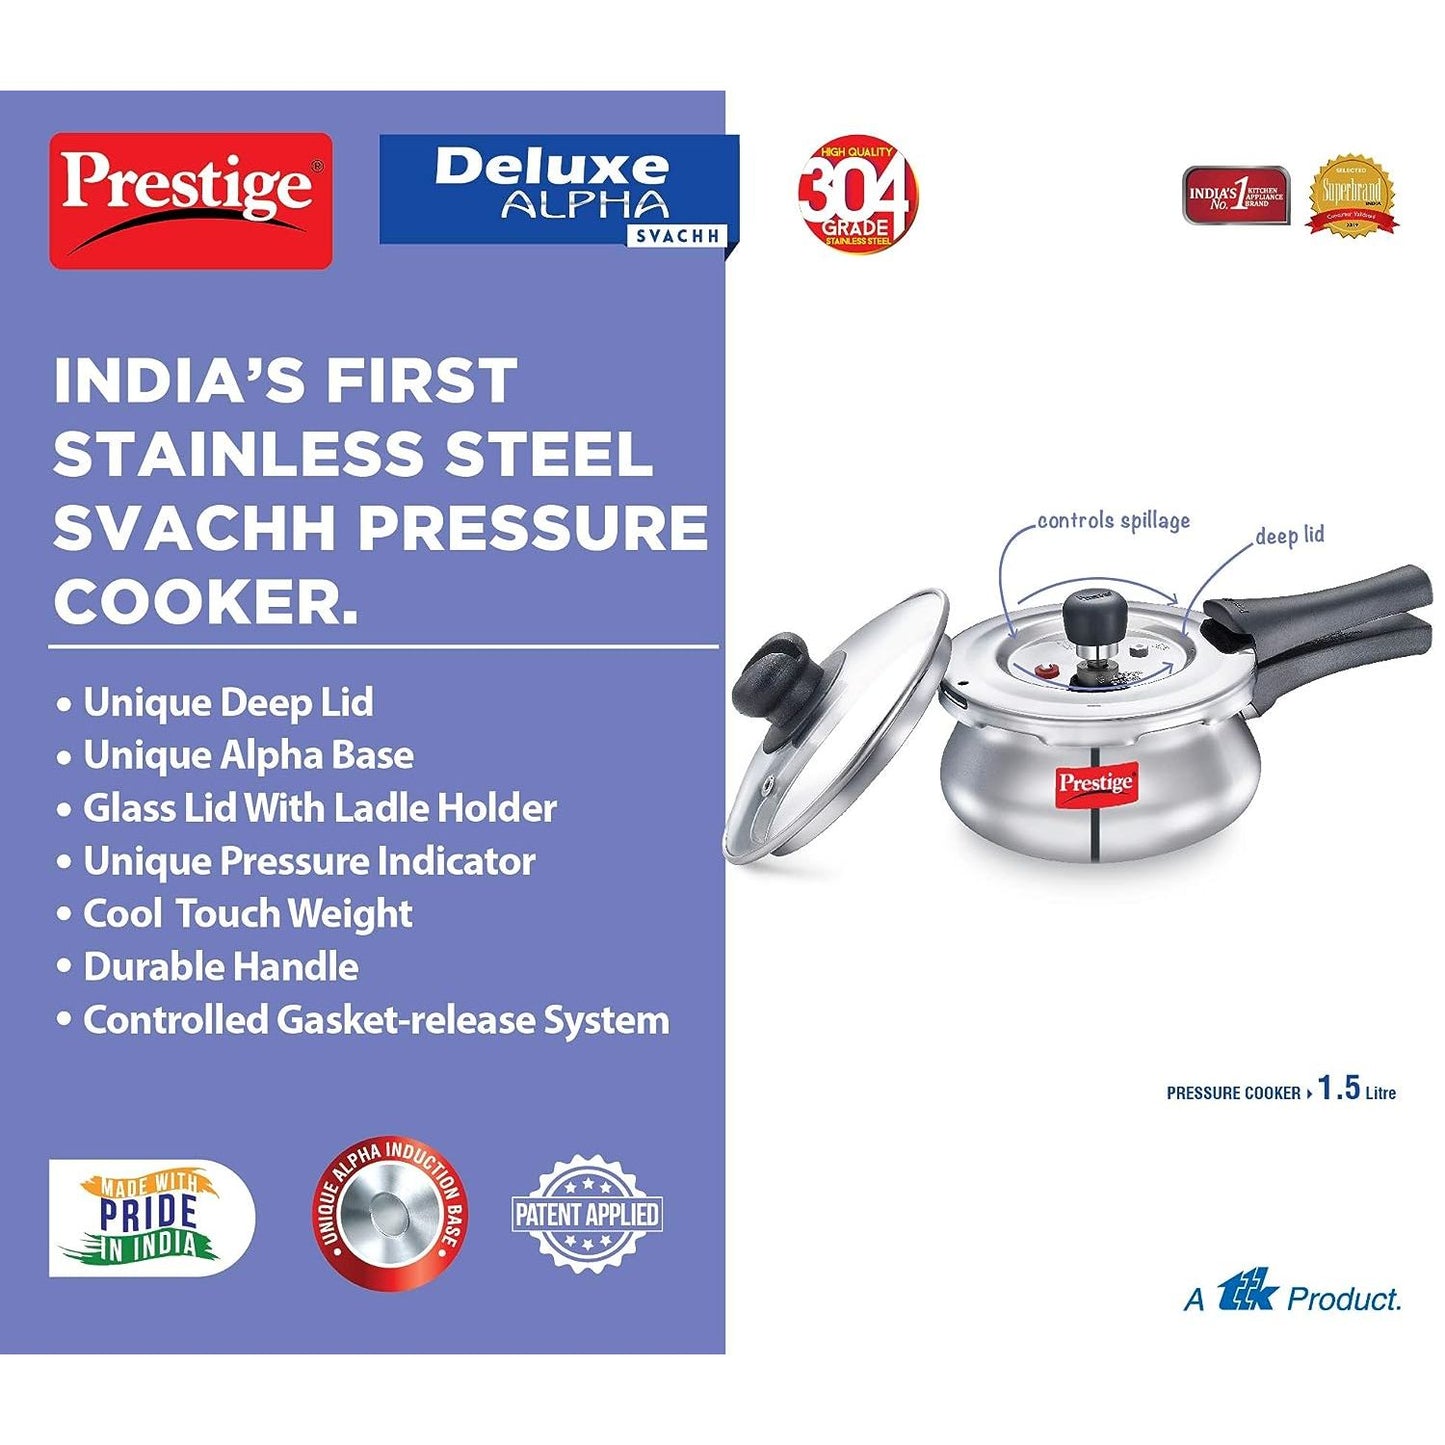 Prestige Deluxe Alpha Svachh Stainless Steel Induction Base Pressure Cooker Handi with Glass Lid, 1.5 Litres